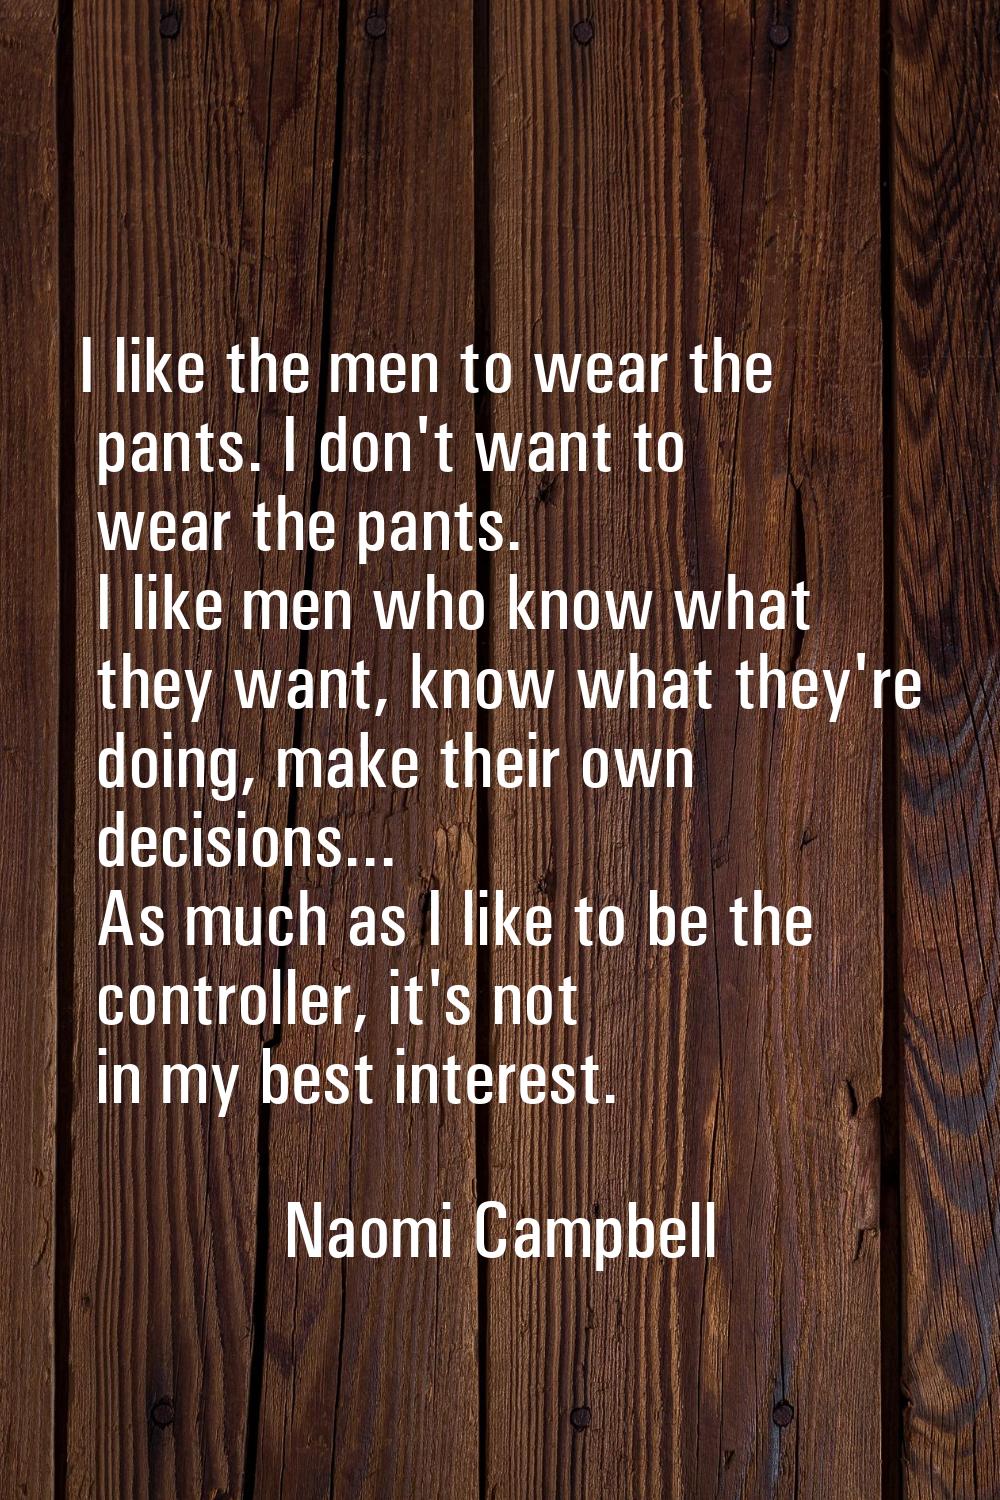 I like the men to wear the pants. I don't want to wear the pants. I like men who know what they wan